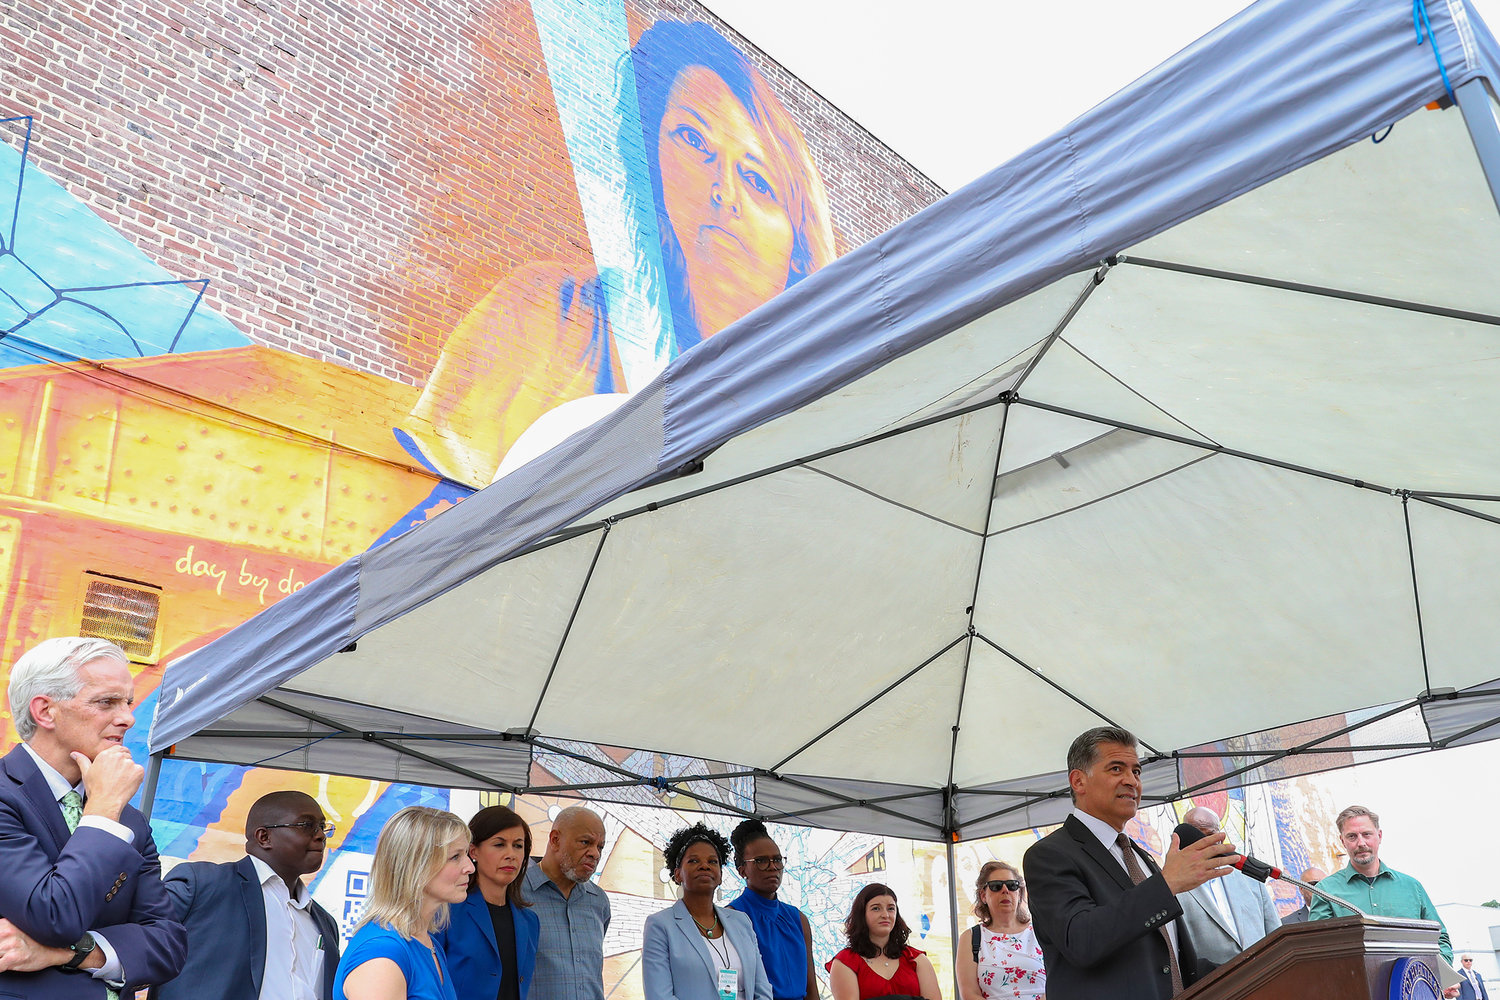 Xavier Becerra, Secretary of the Department of Health and Human Services, speaks during a press conference on the kickoff of 988, a new national mental health hotline, Friday, July 15, 2022, in Philadelphia. The press conference took place in front of the Contemplation, Clarity and Resilience mural by artist Eric Okdeh, which is a mural that represents, among many other things, the process of overcoming hardships.